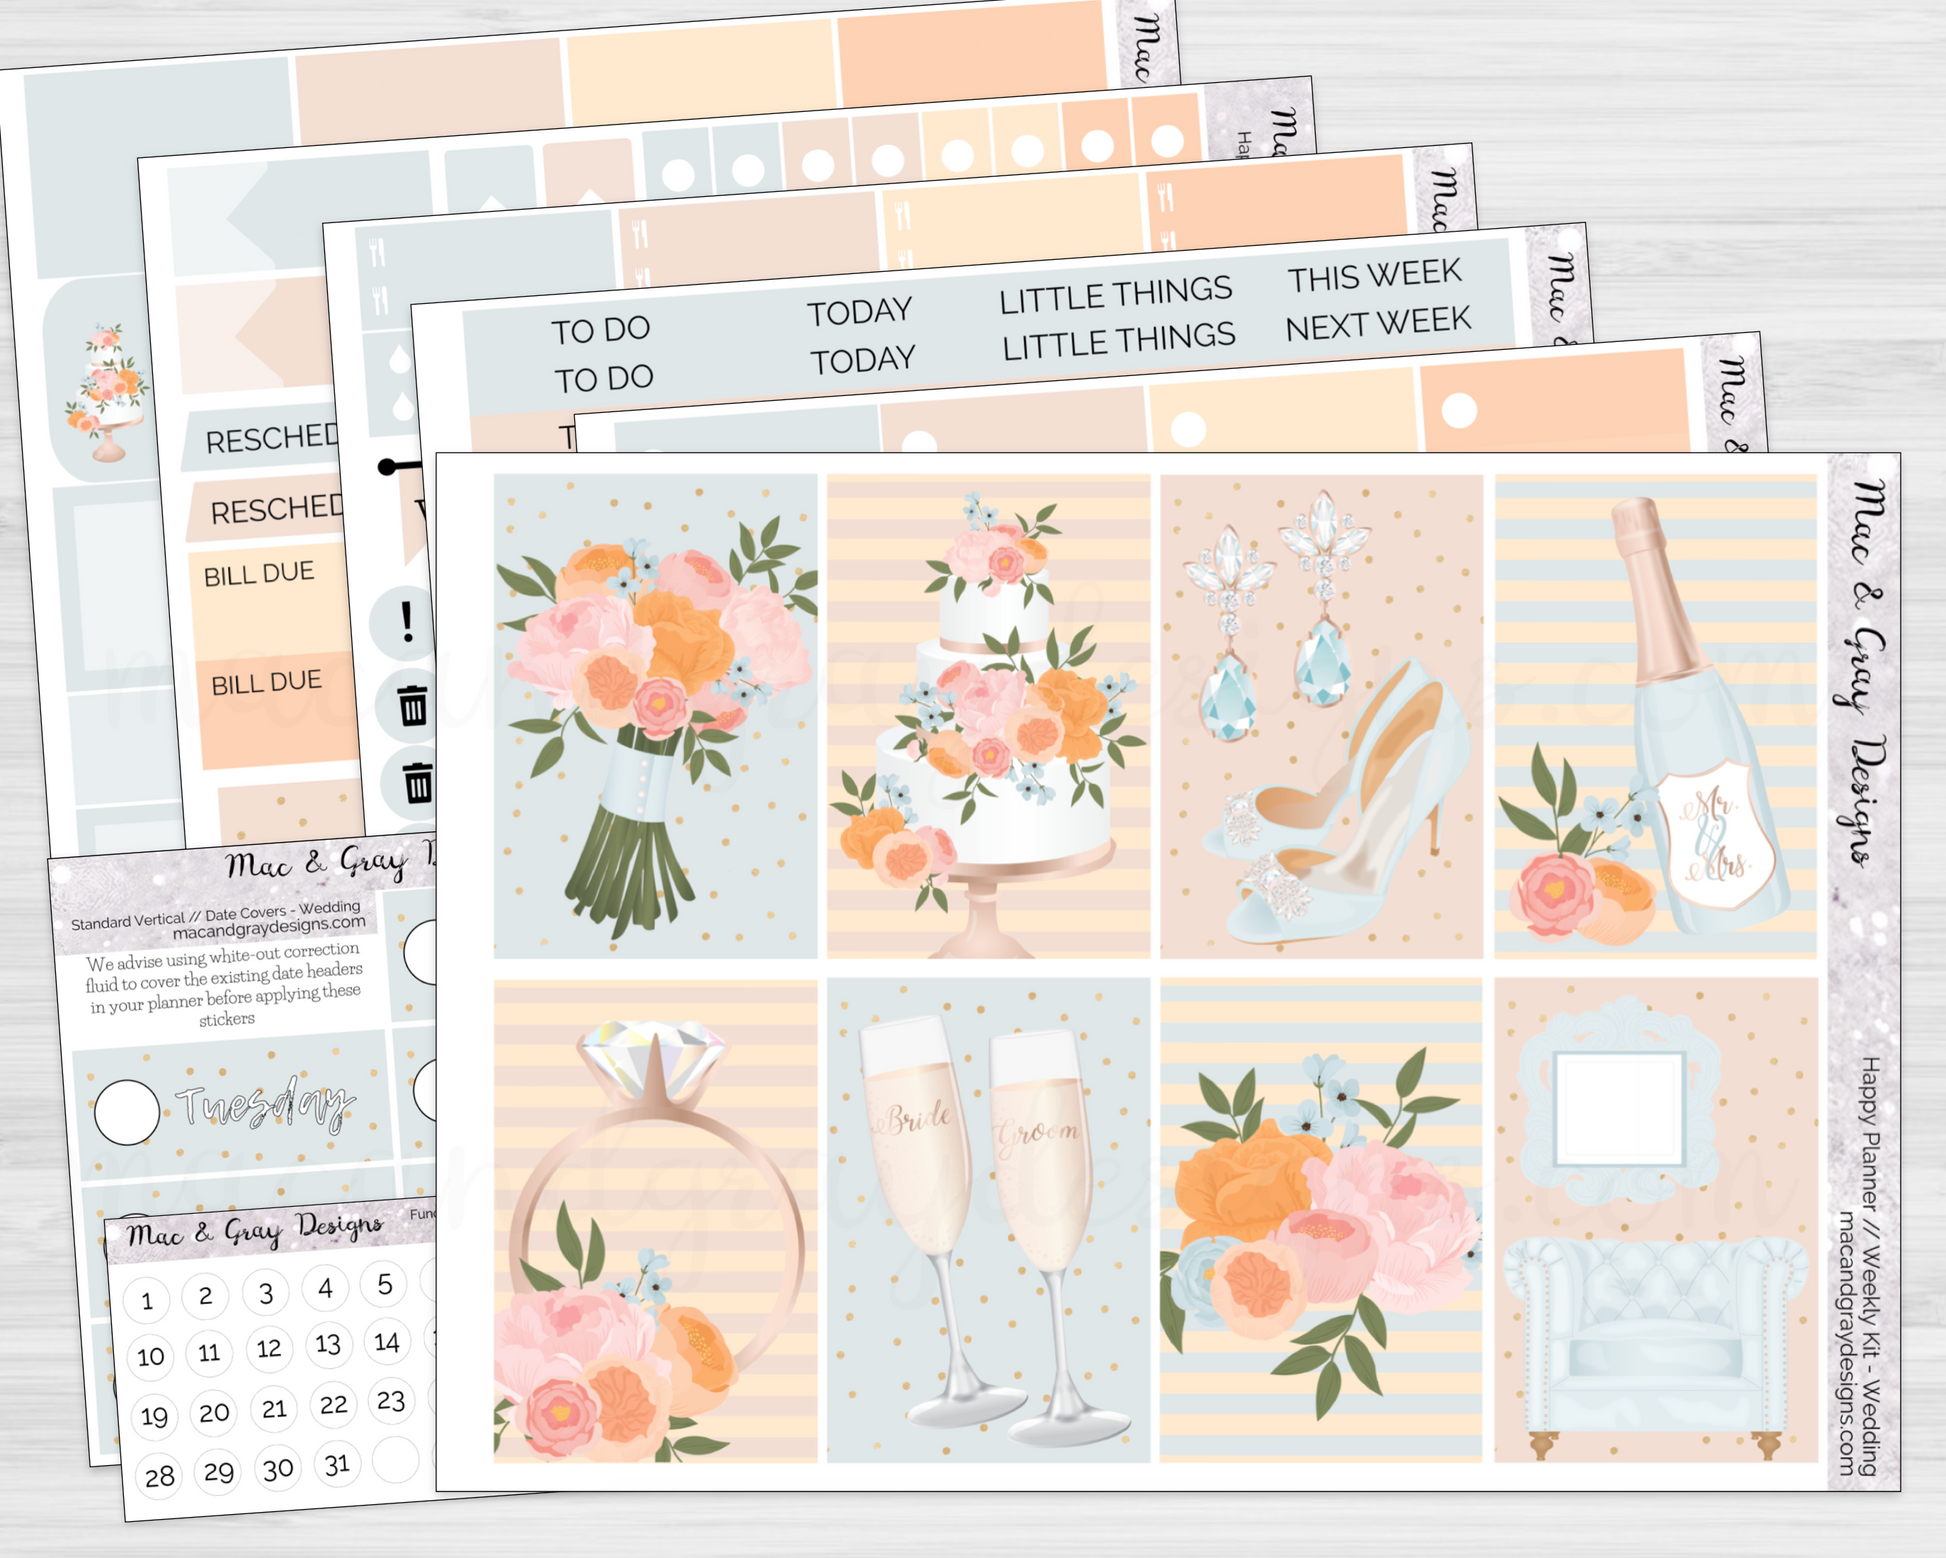 Spring Themed Hobonichi Weeks Sticker Kit 20 2 Sticker Sheets Planner and Hobonichi  Stickers 